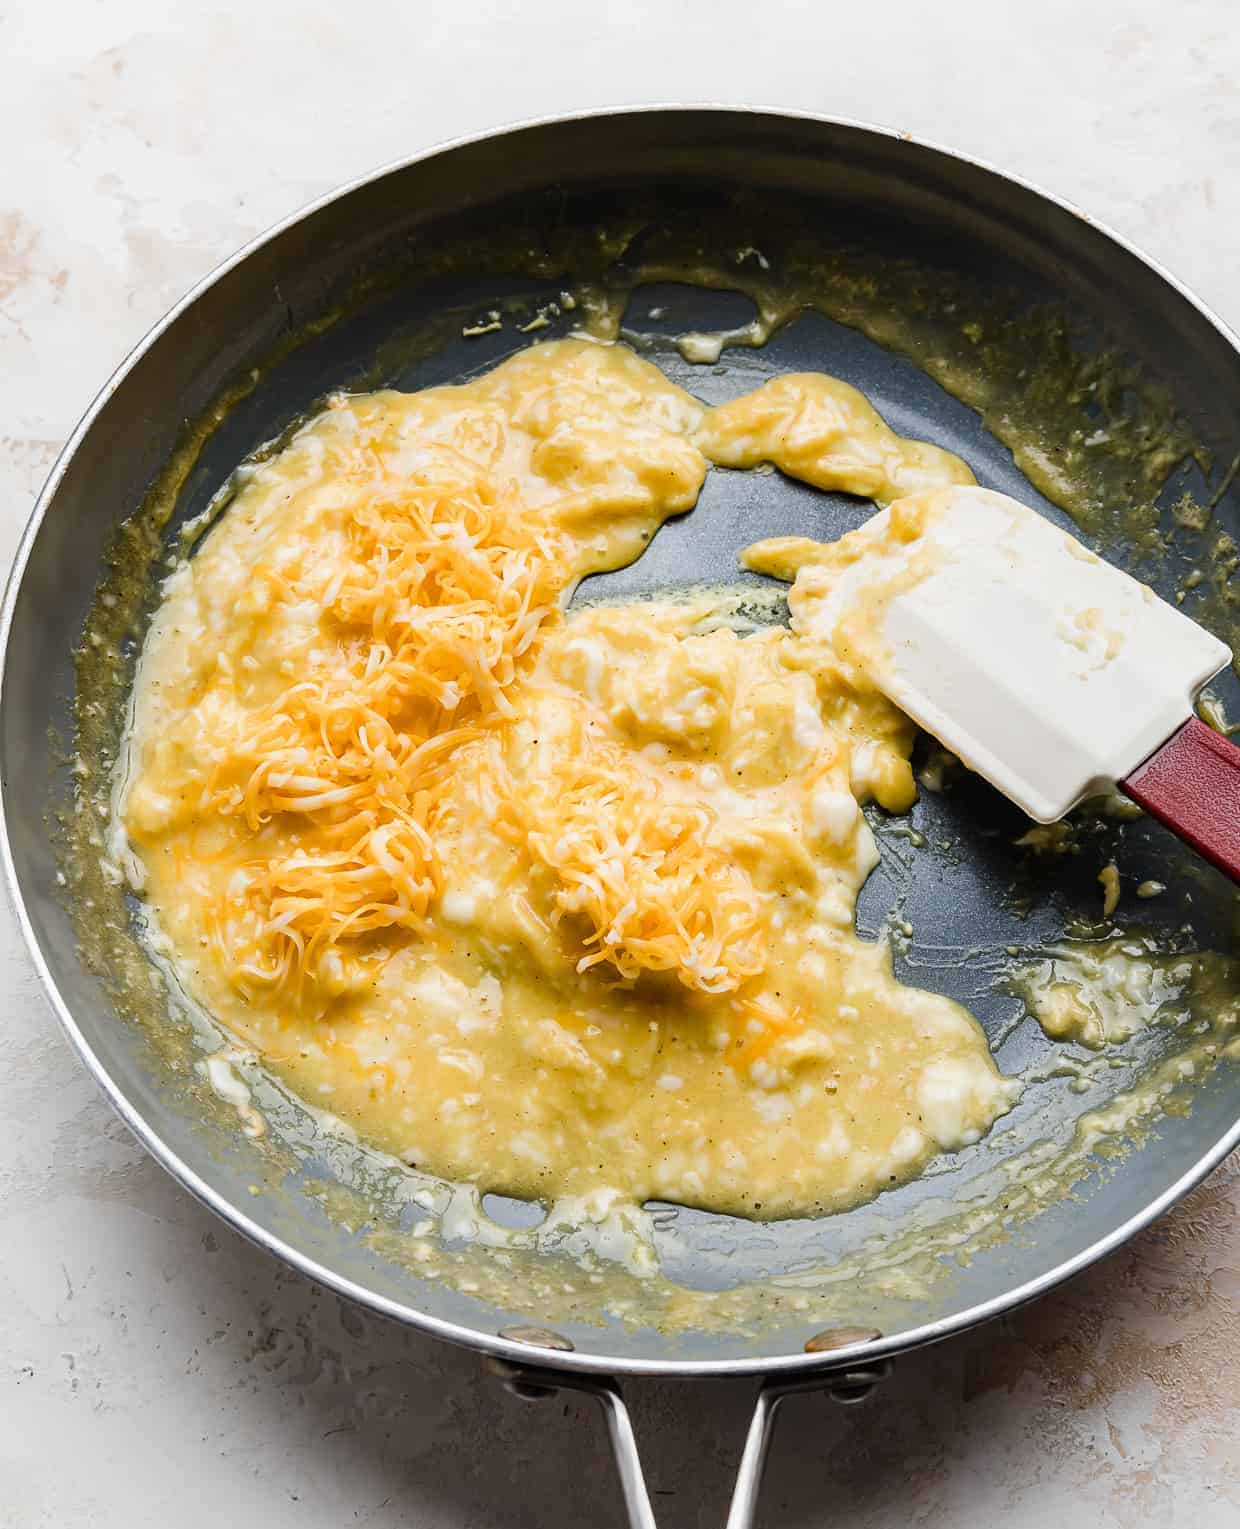 Shredded cheddar cheese overtop scrambled eggs in a skillet.